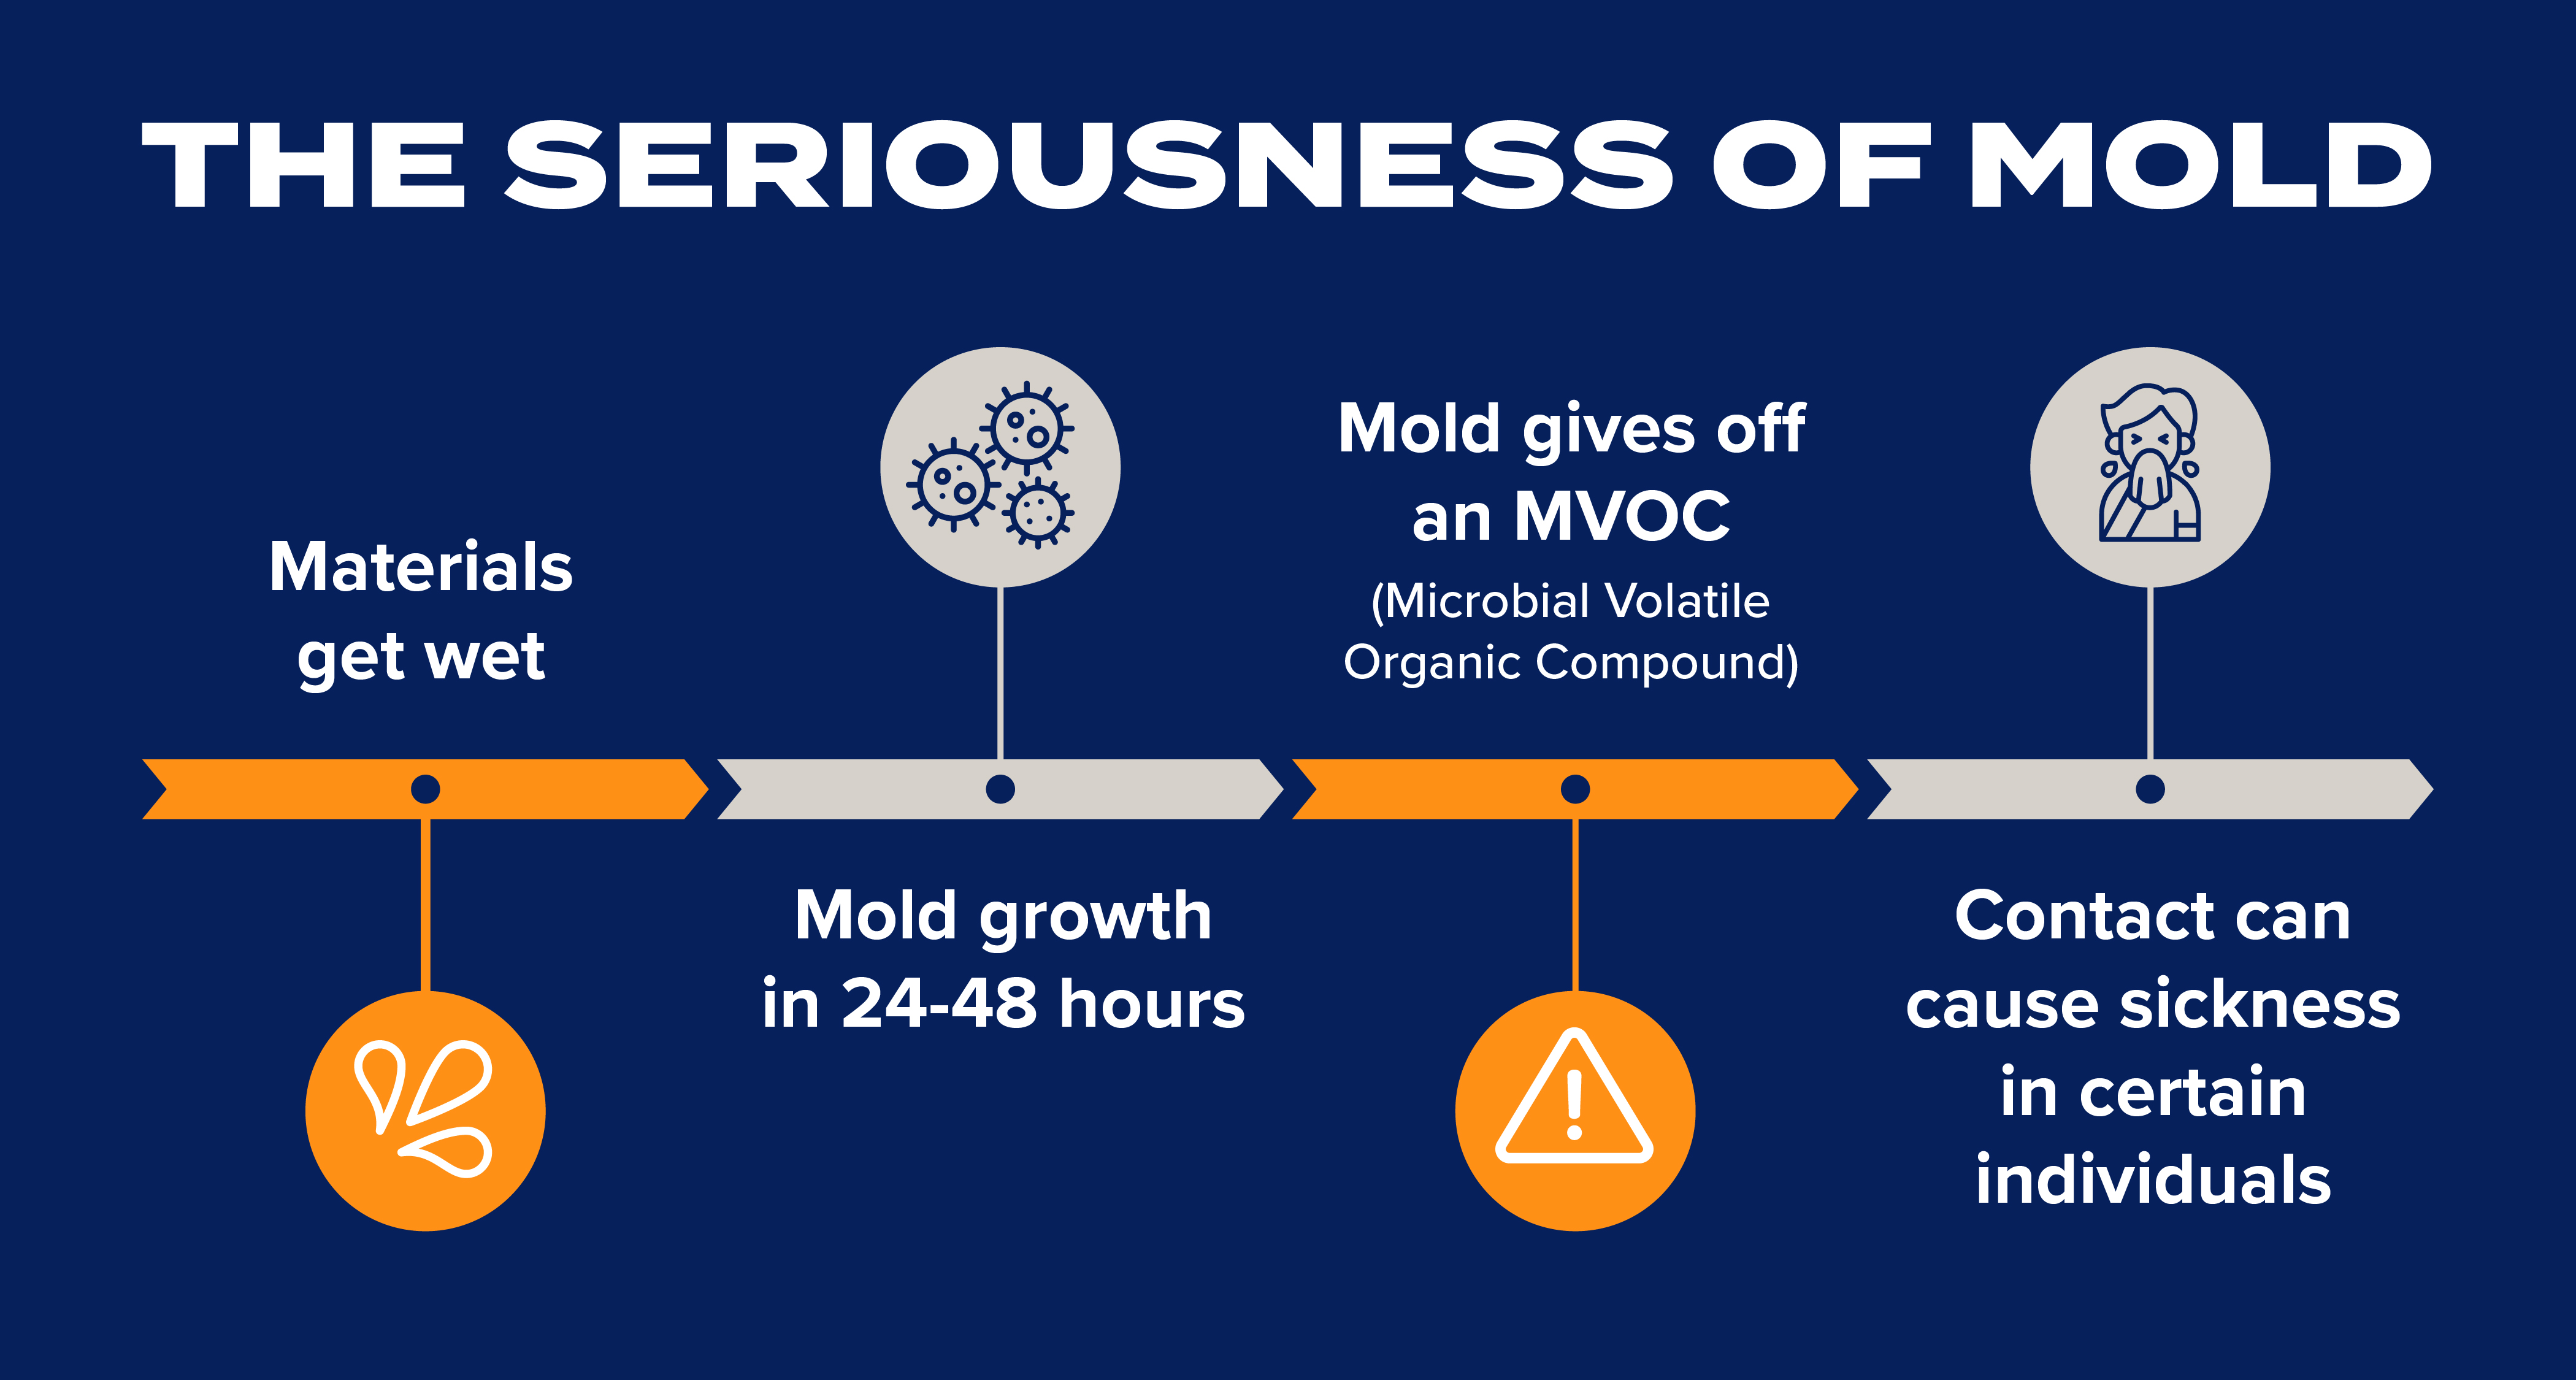 The Seriousness of Mould graphic